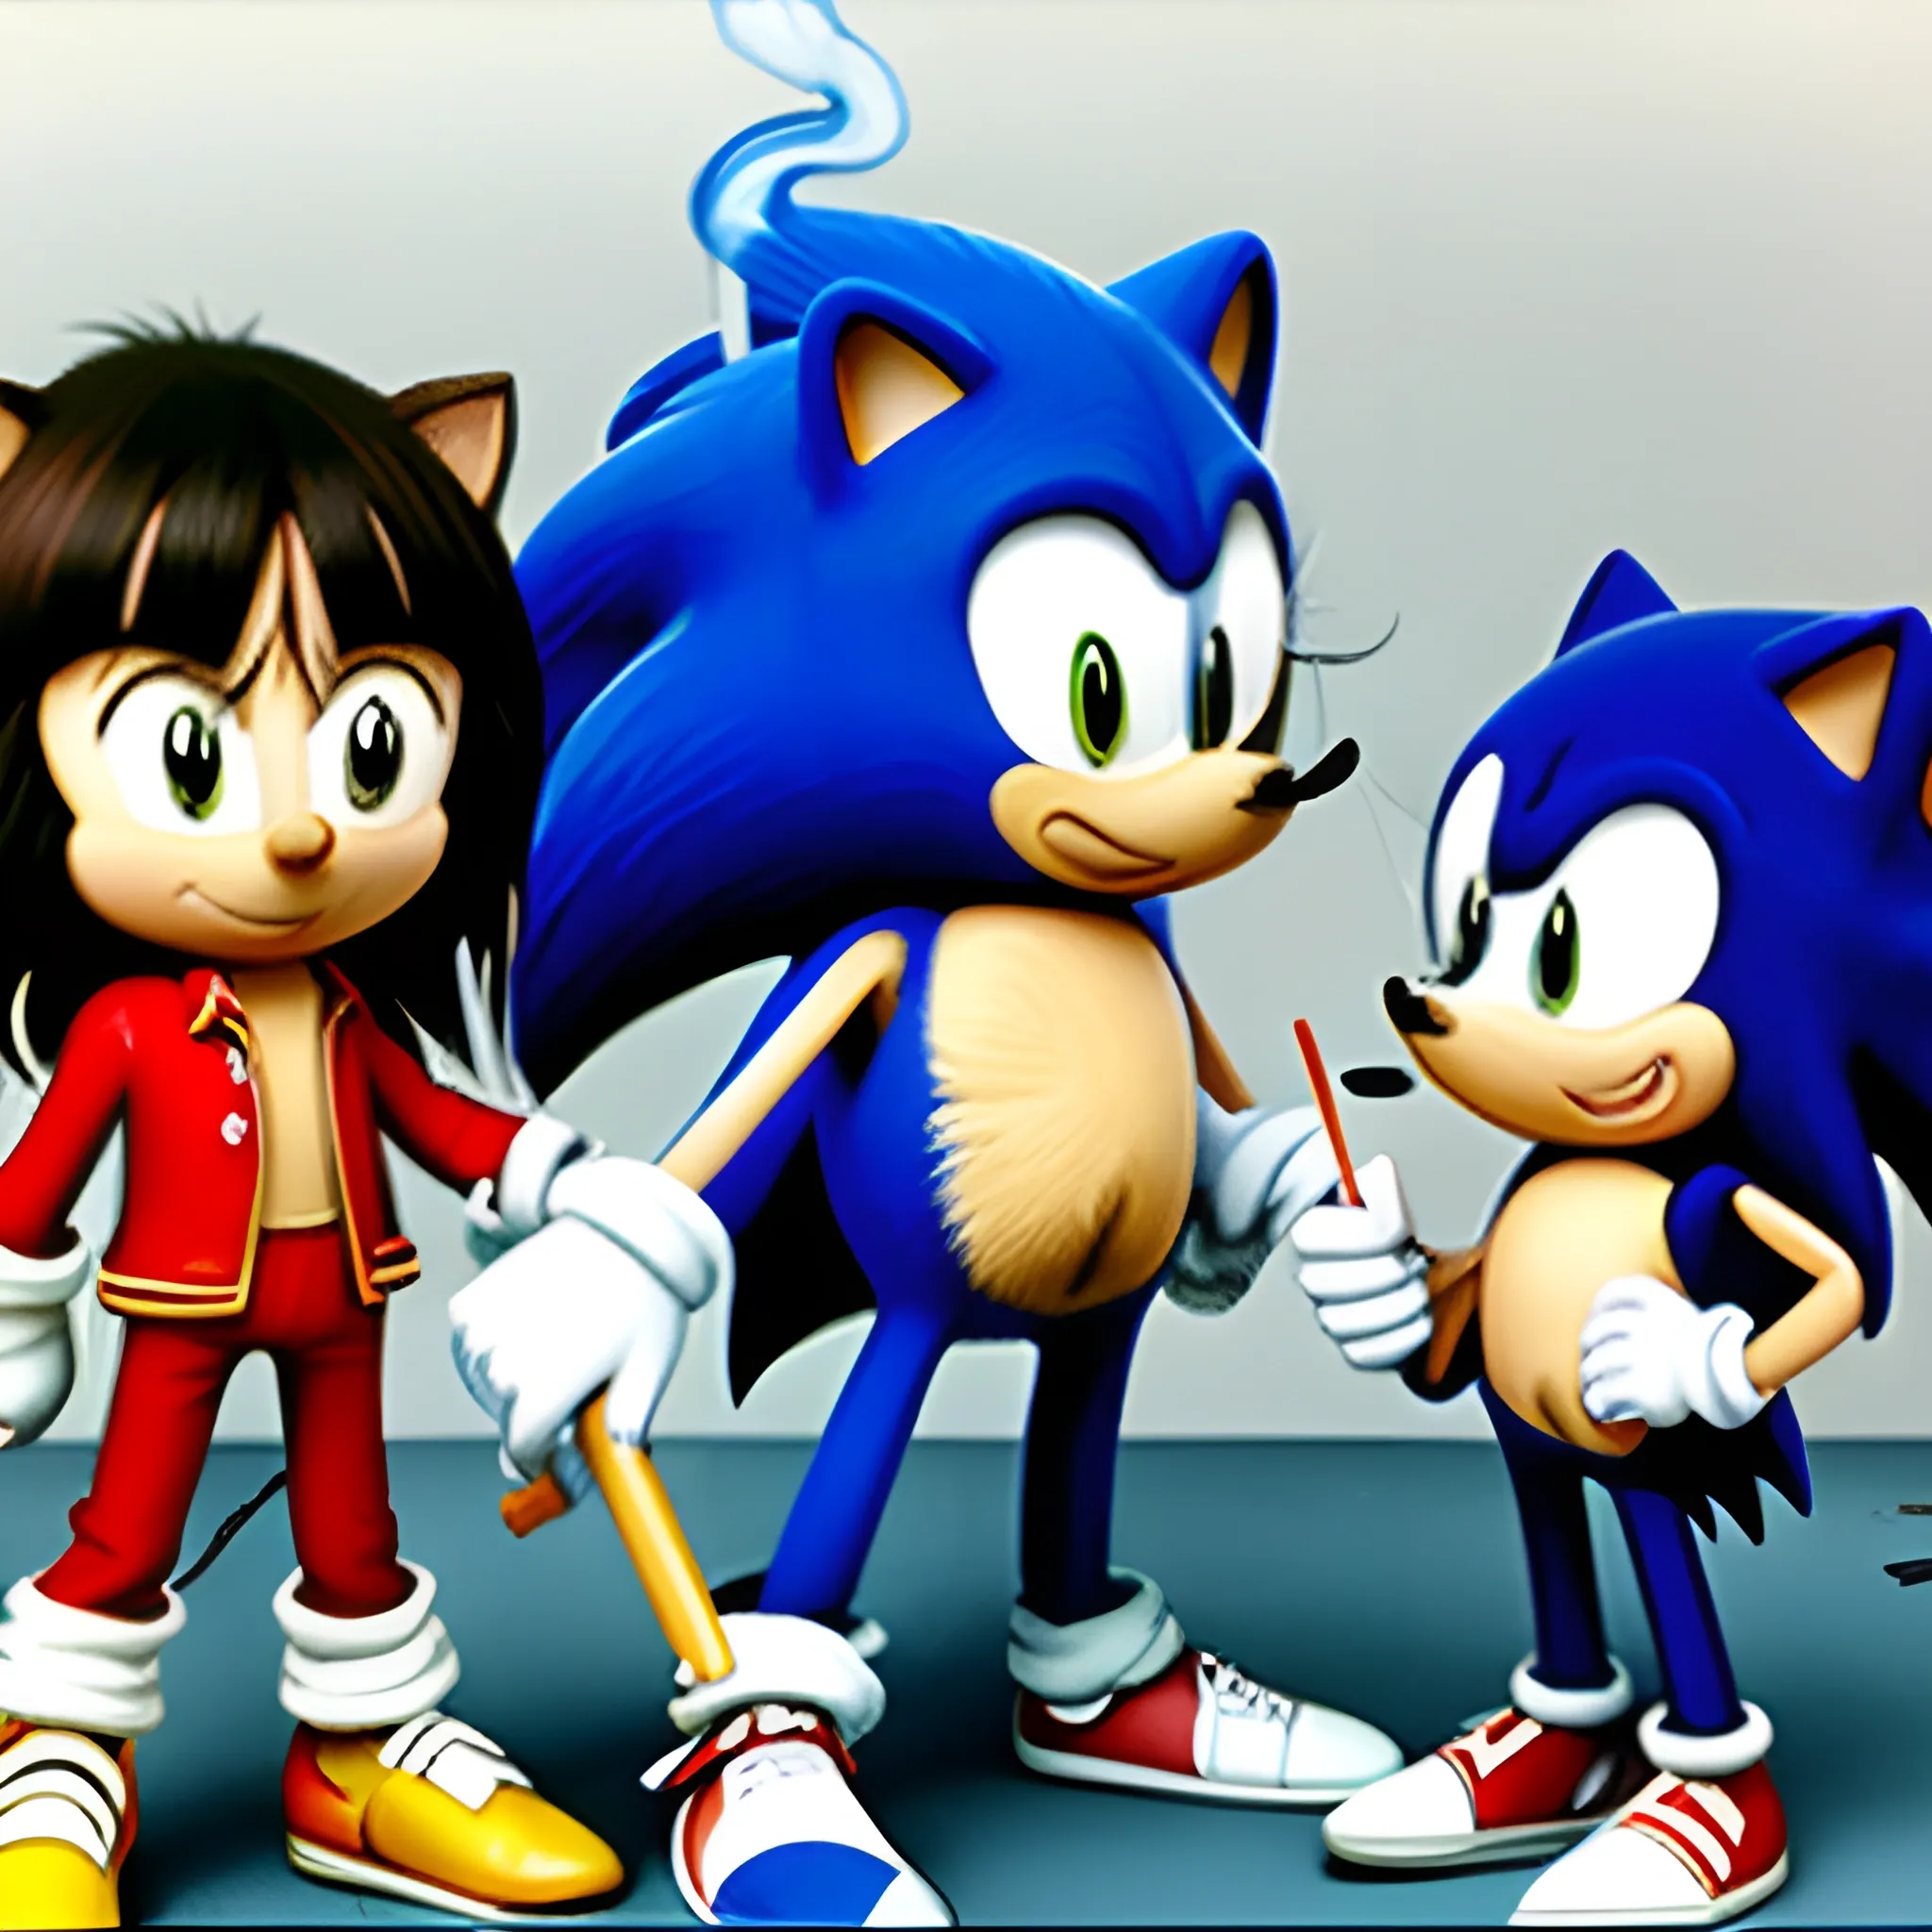 The Beatles & Sonic the hedgehog, smoking a joint, 